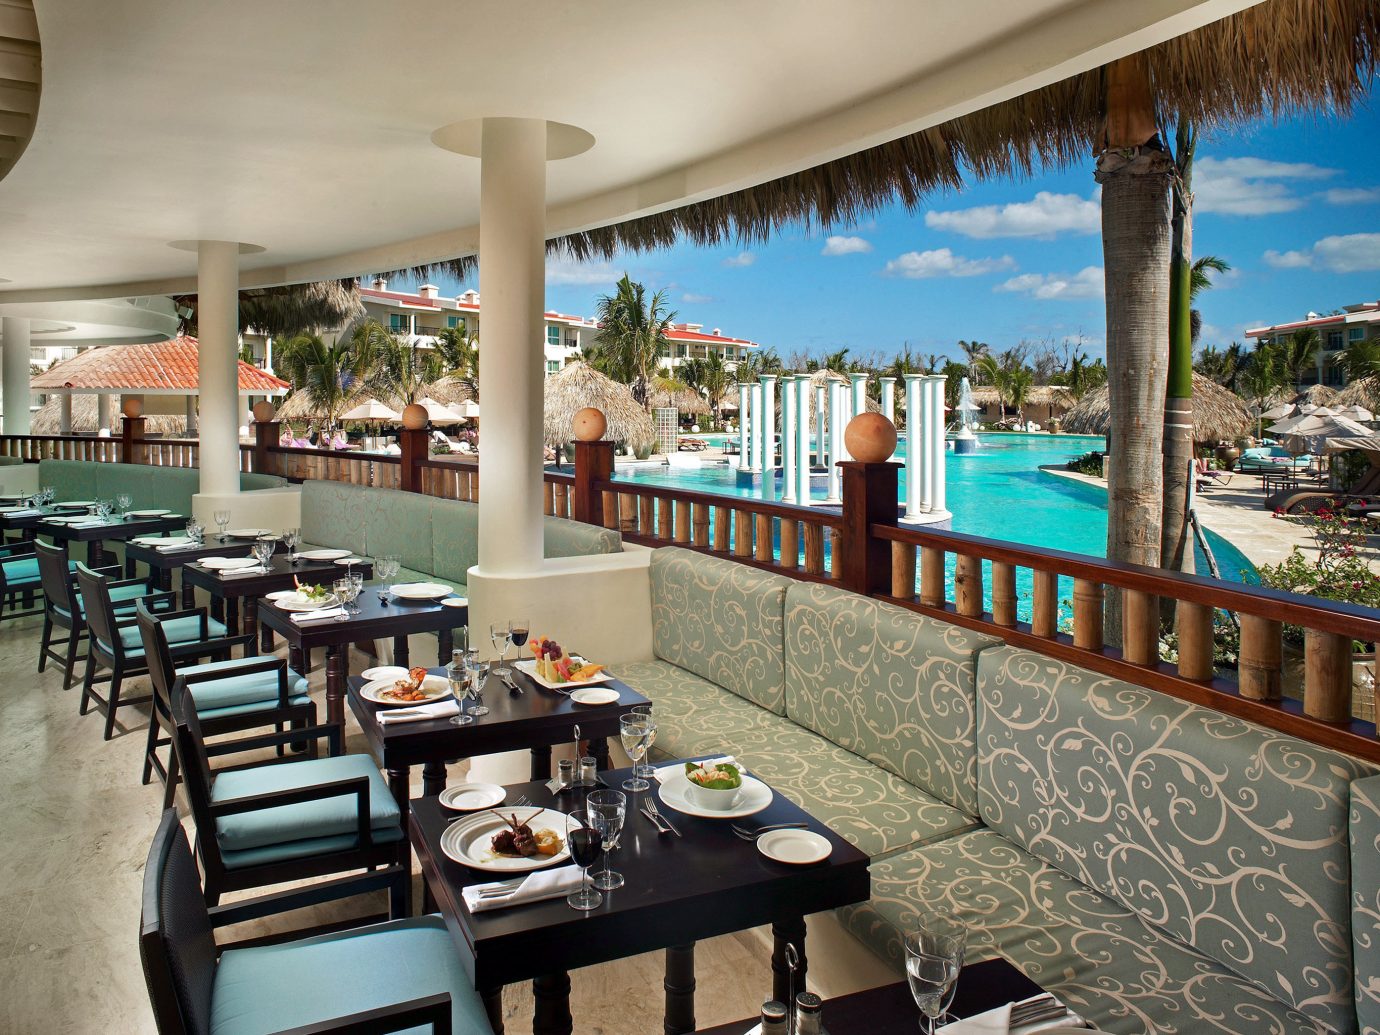 All-inclusive Balcony Dining Drink Eat Family Hotels Patio Pool Resort Terrace table chair floor leisure property indoor restaurant ceiling vacation estate condominium interior design area furniture several